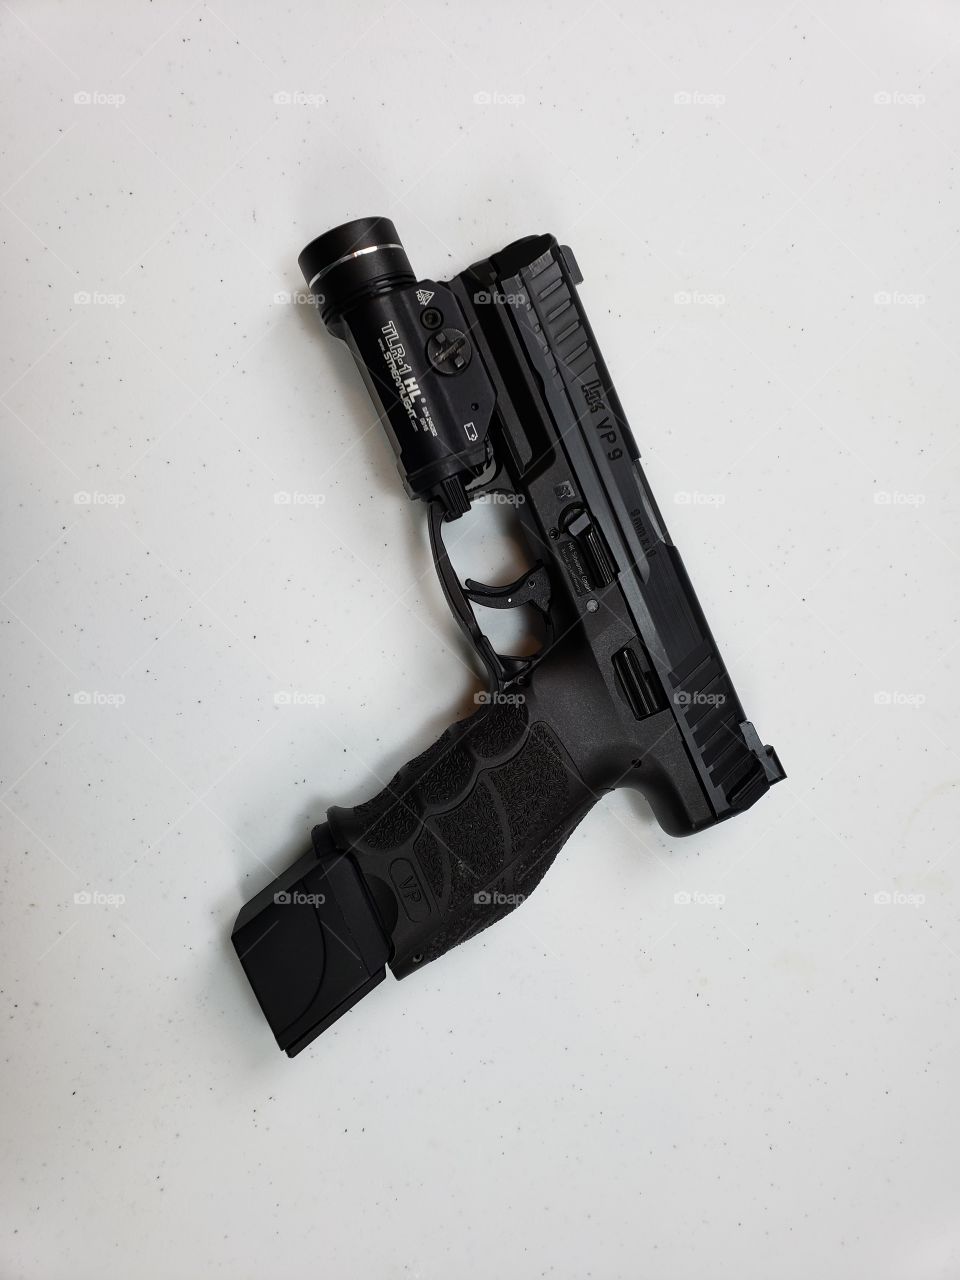 HK VP9 with a 20 round magazine and light